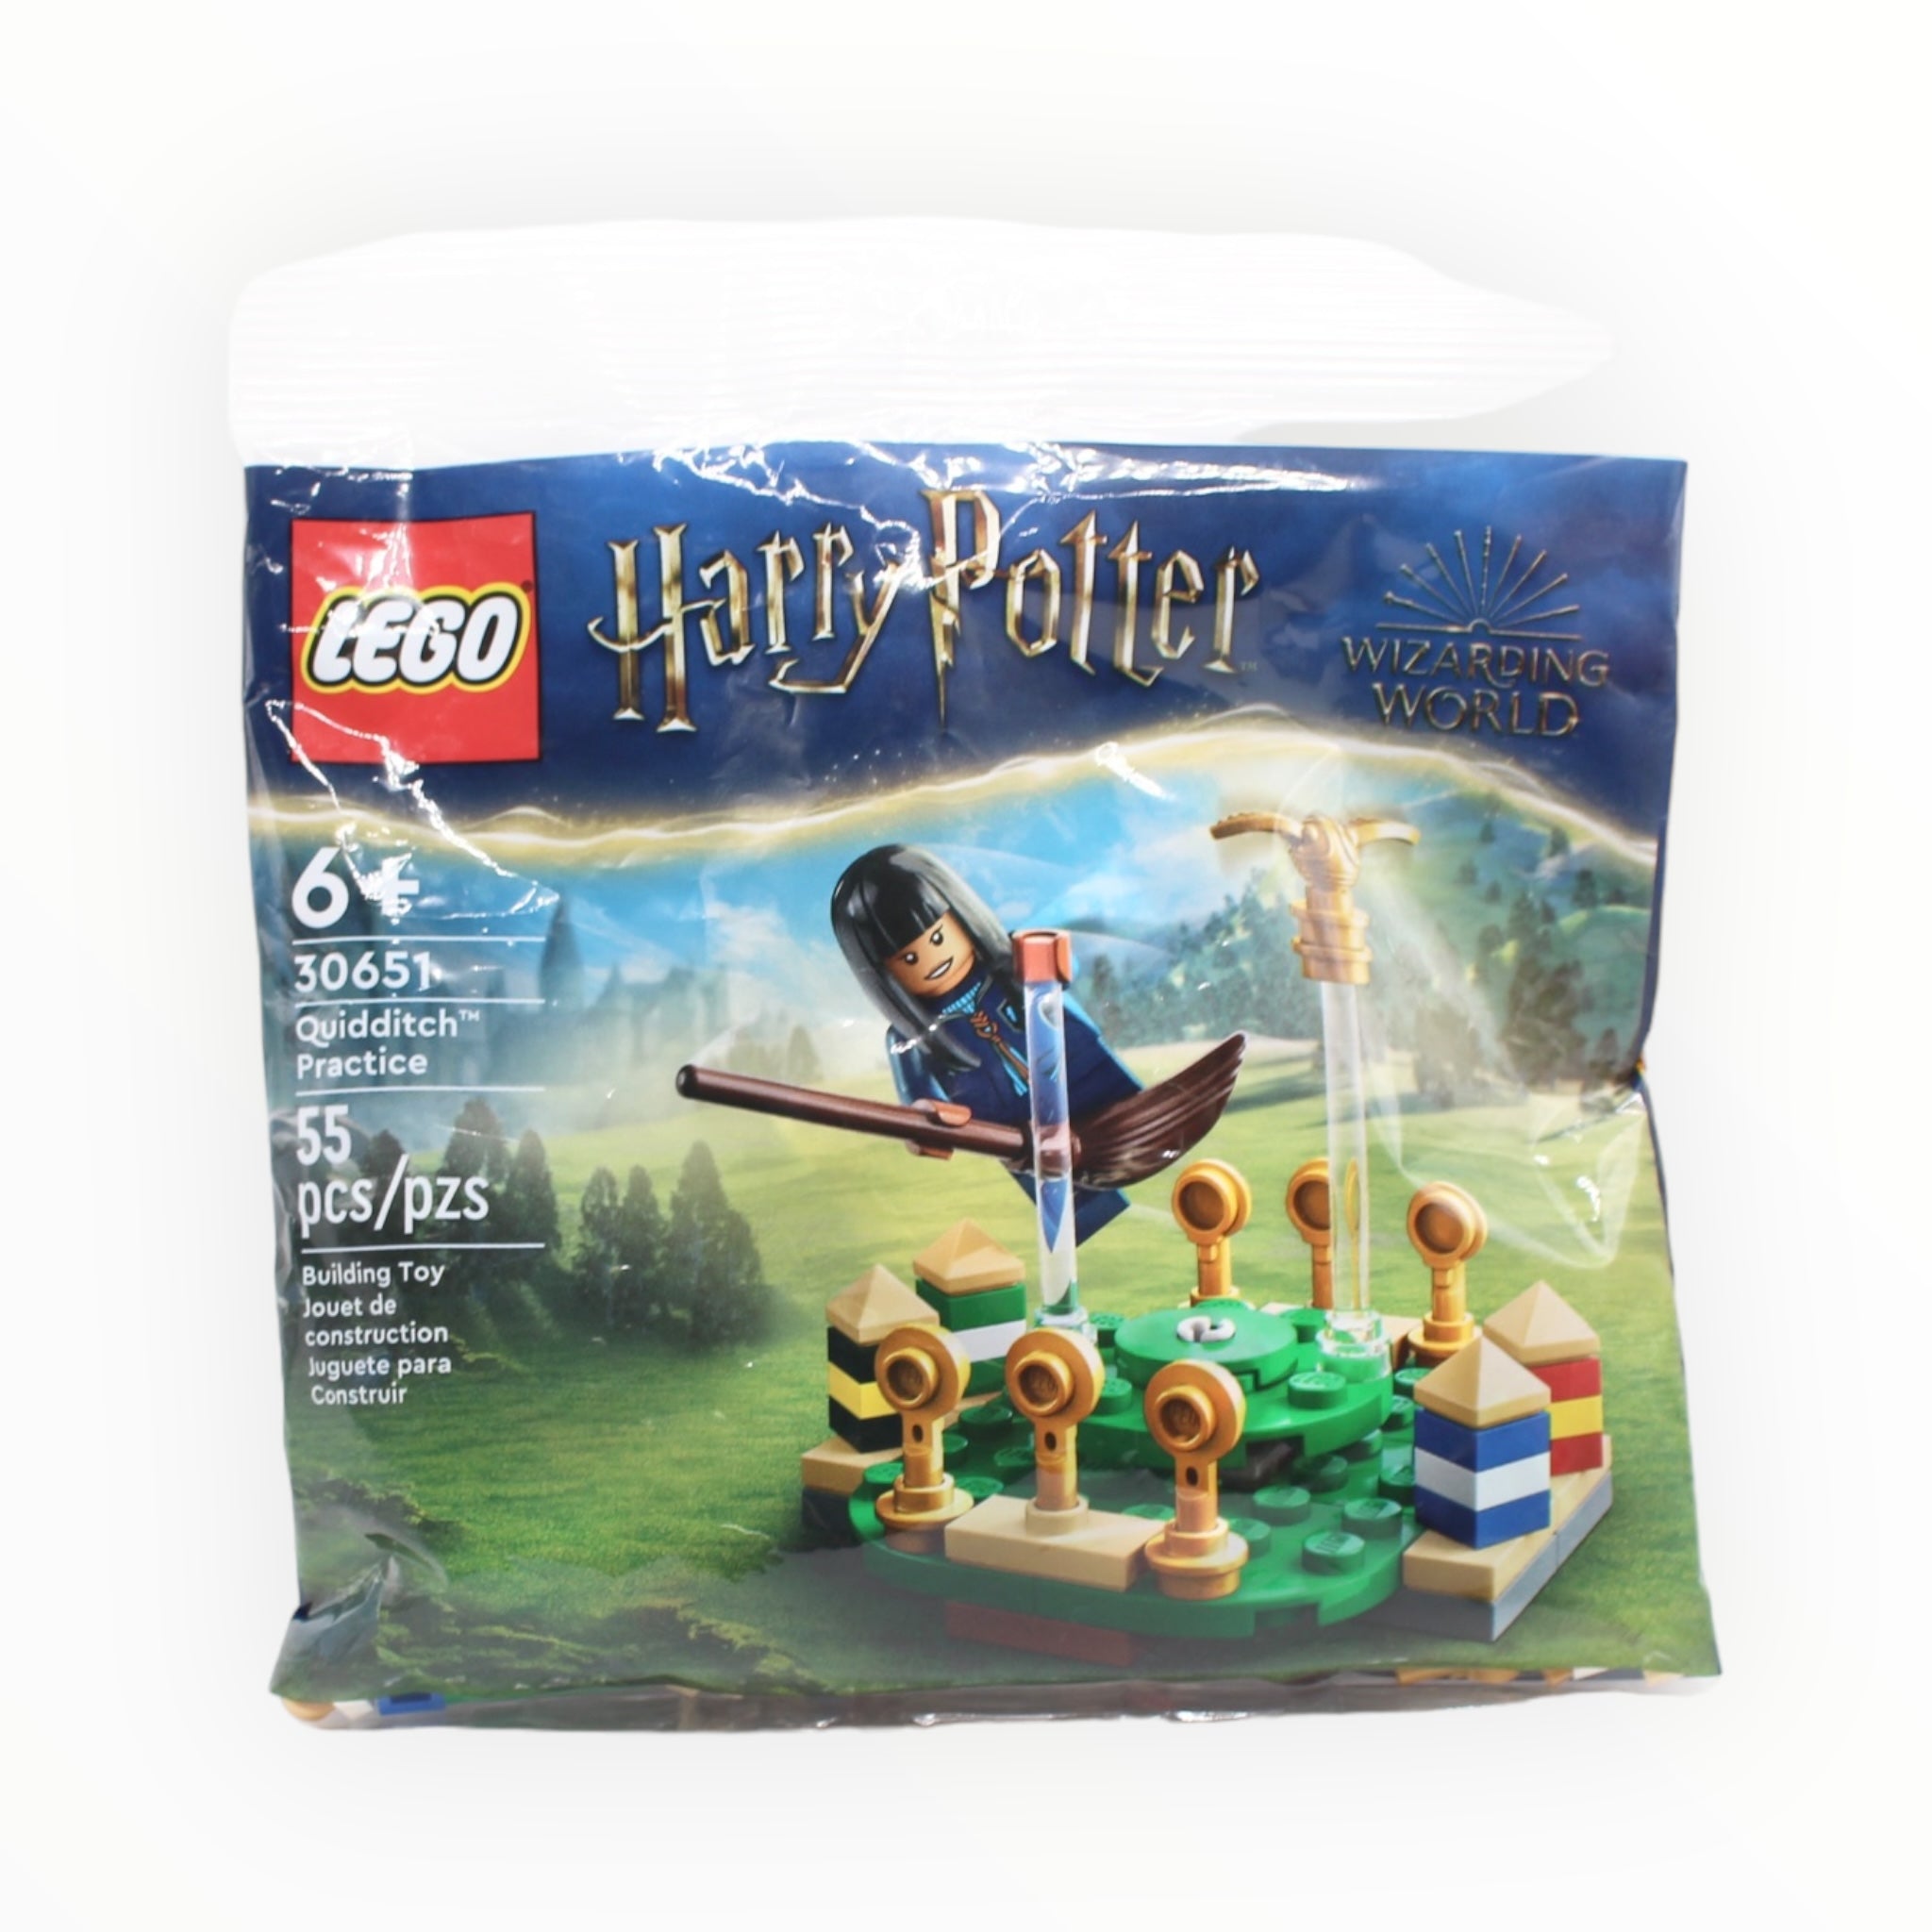 Polybag 30651 Harry Potter Quidditch Practice